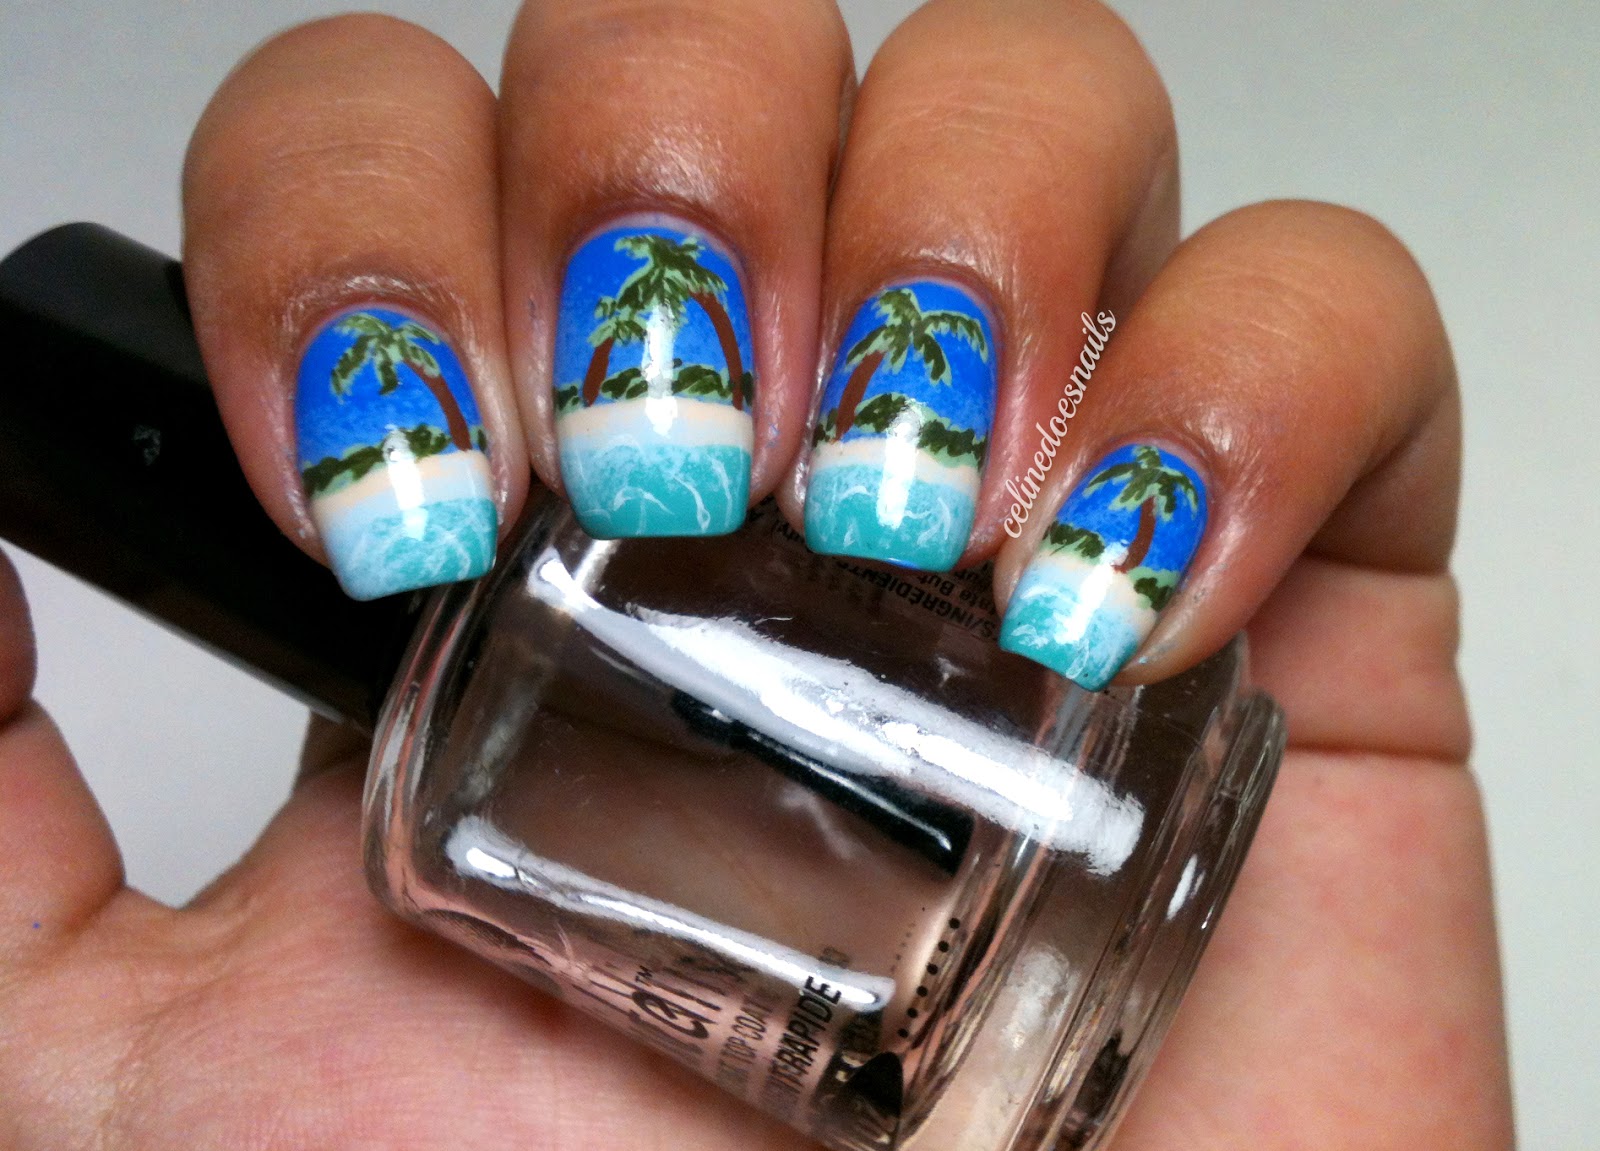 2. Tropical Palm Tree Nails - wide 6